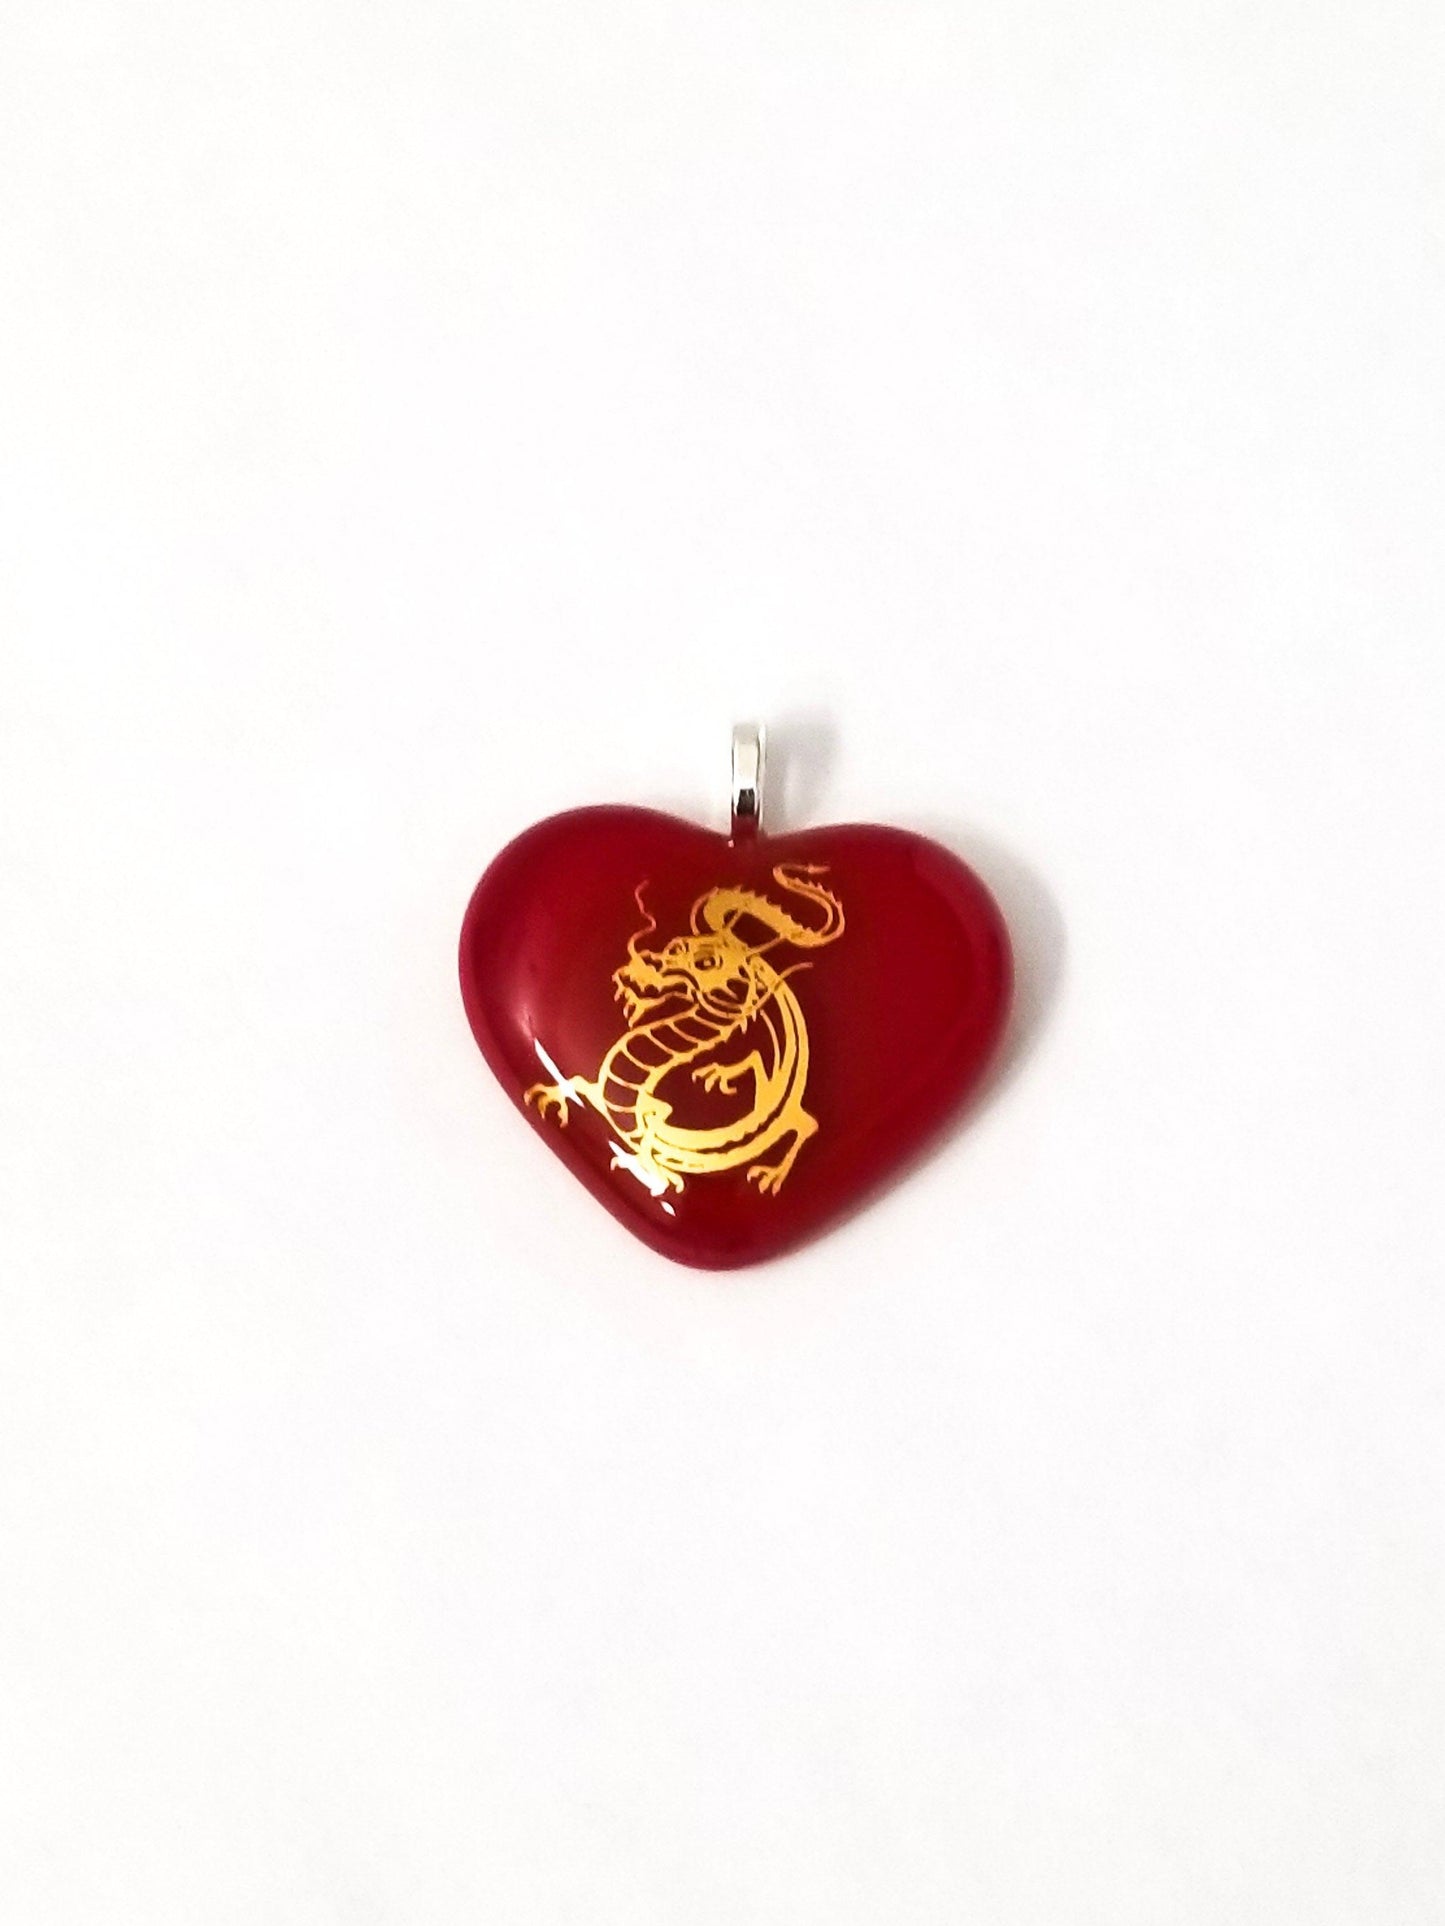 Gold Dragon on Red Heart Fused Glass Pendant from seeds glassworks